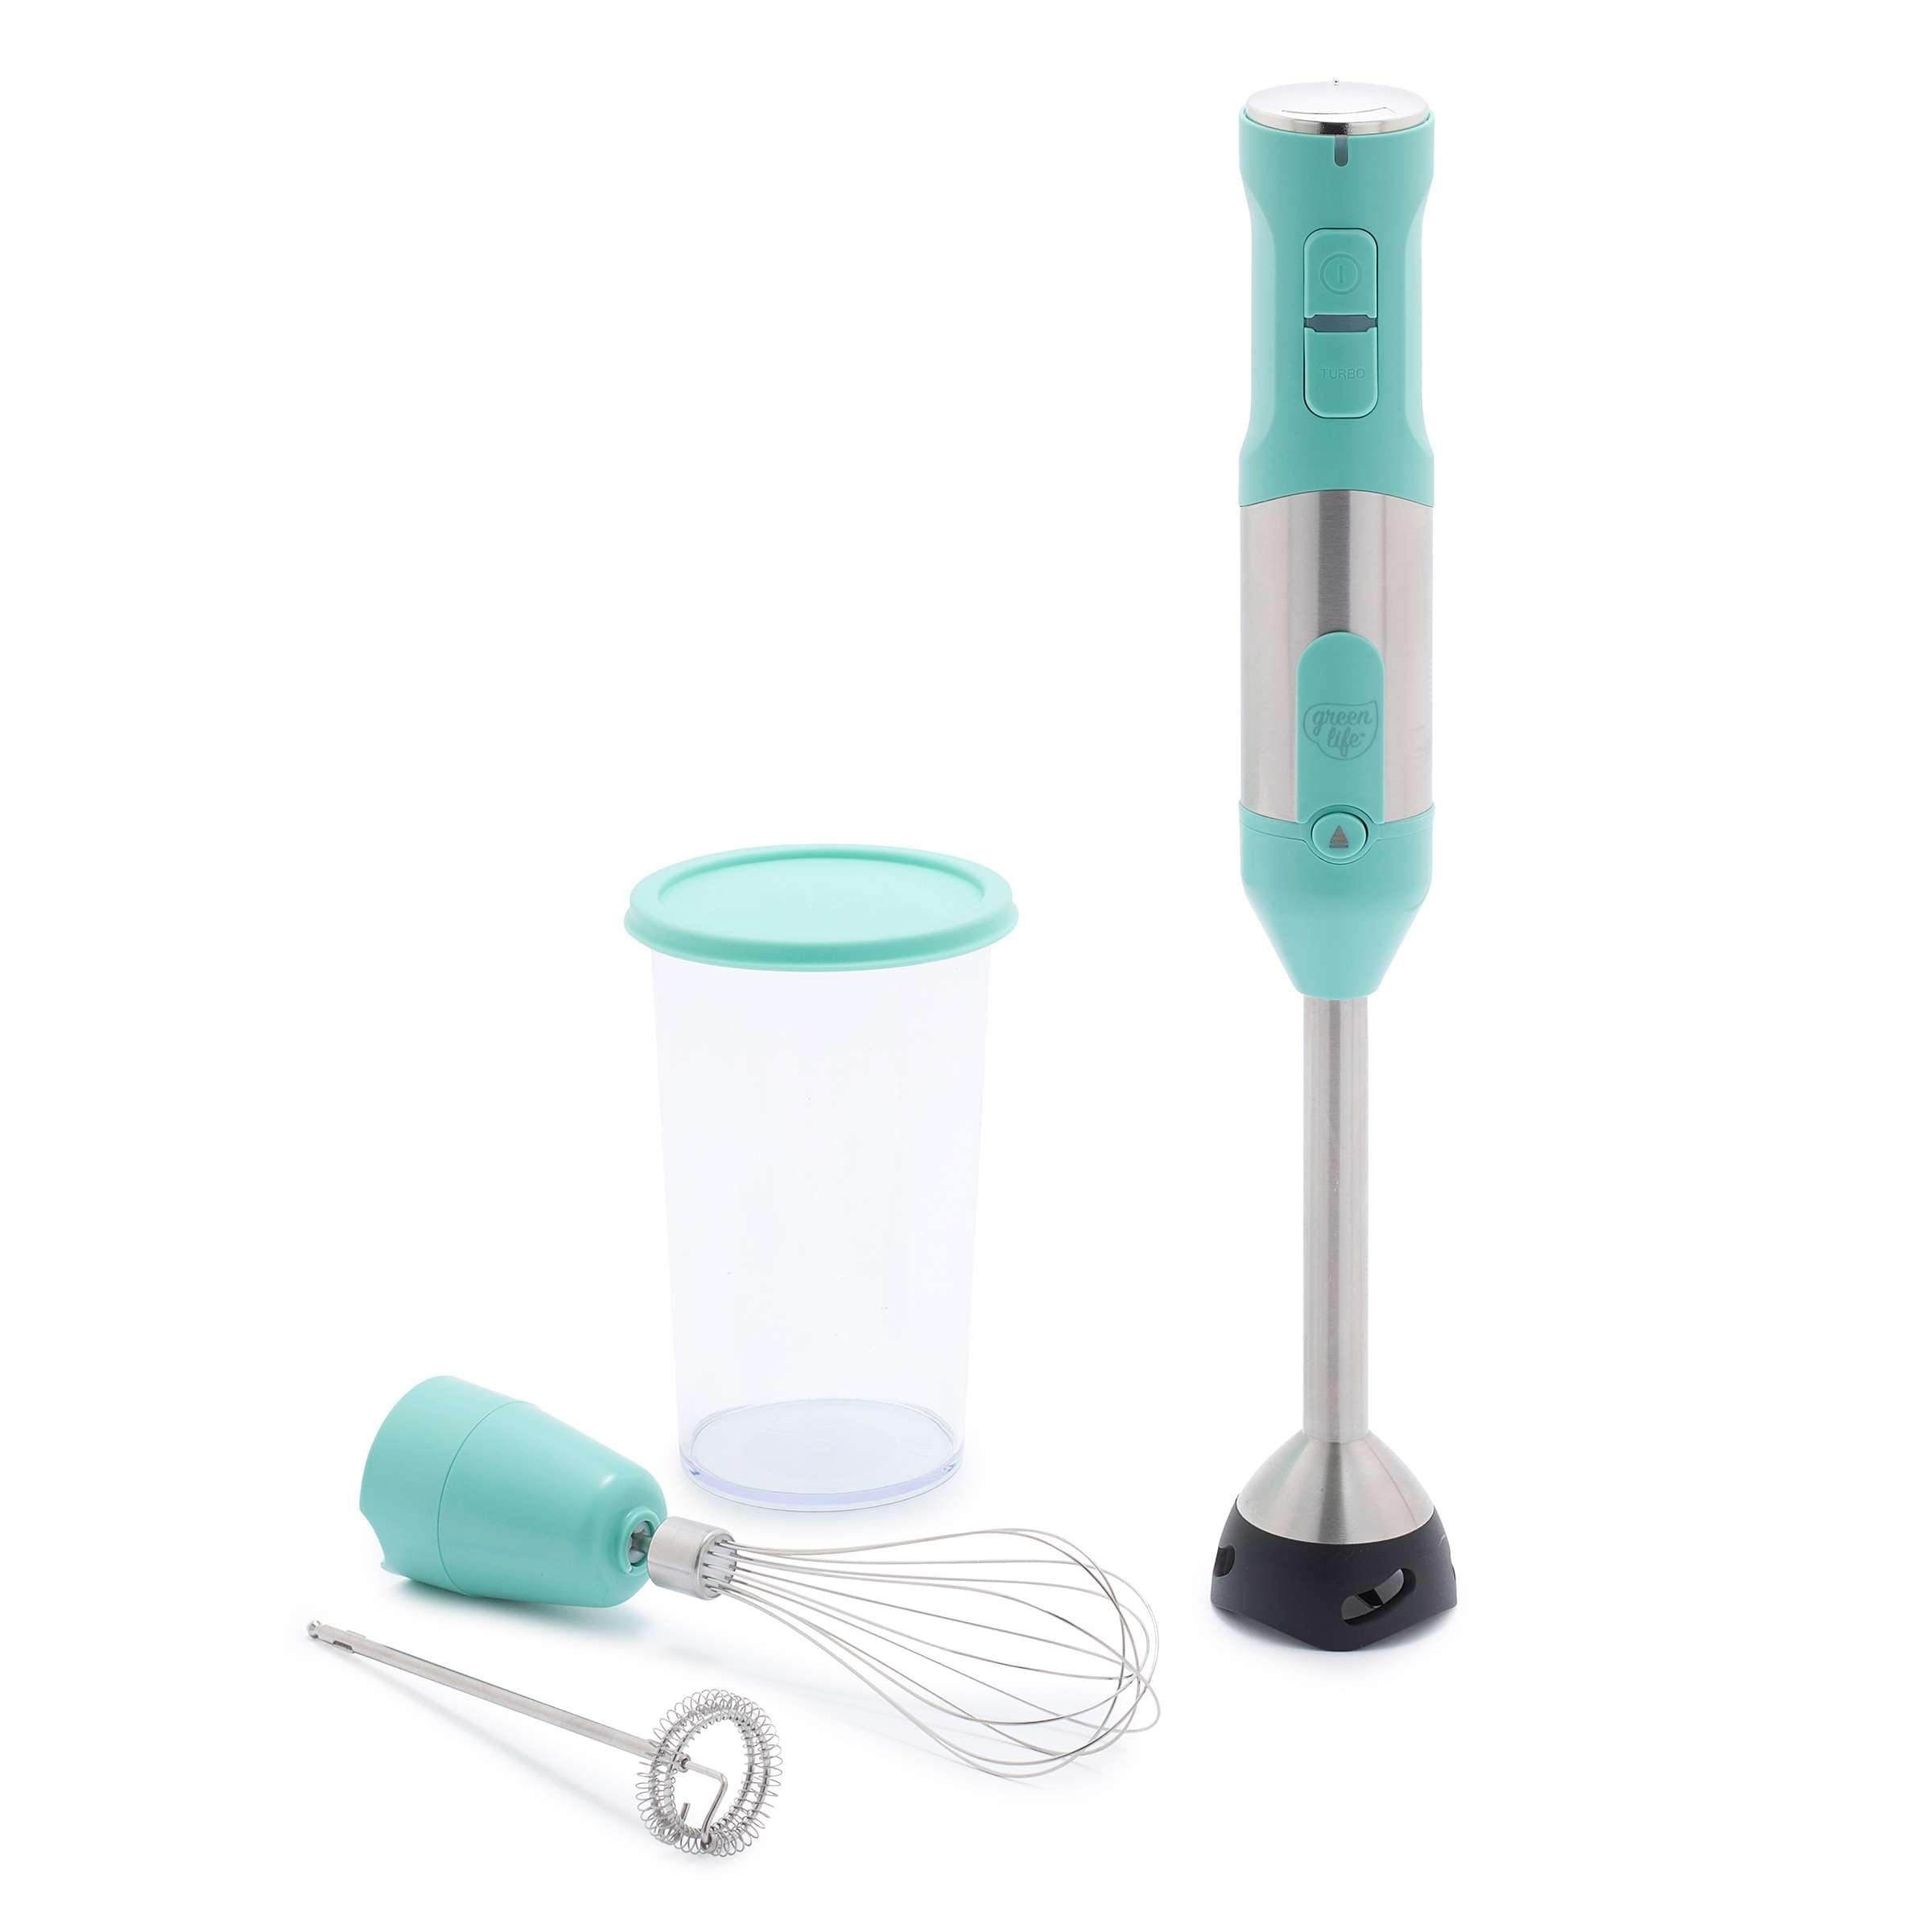 https://ak1.ostkcdn.com/images/products/is/images/direct/cace3566df059bf5d7cb29cec979180ad6e1410b/GreenLife-Variable-Speed-Hand-Blender.jpg